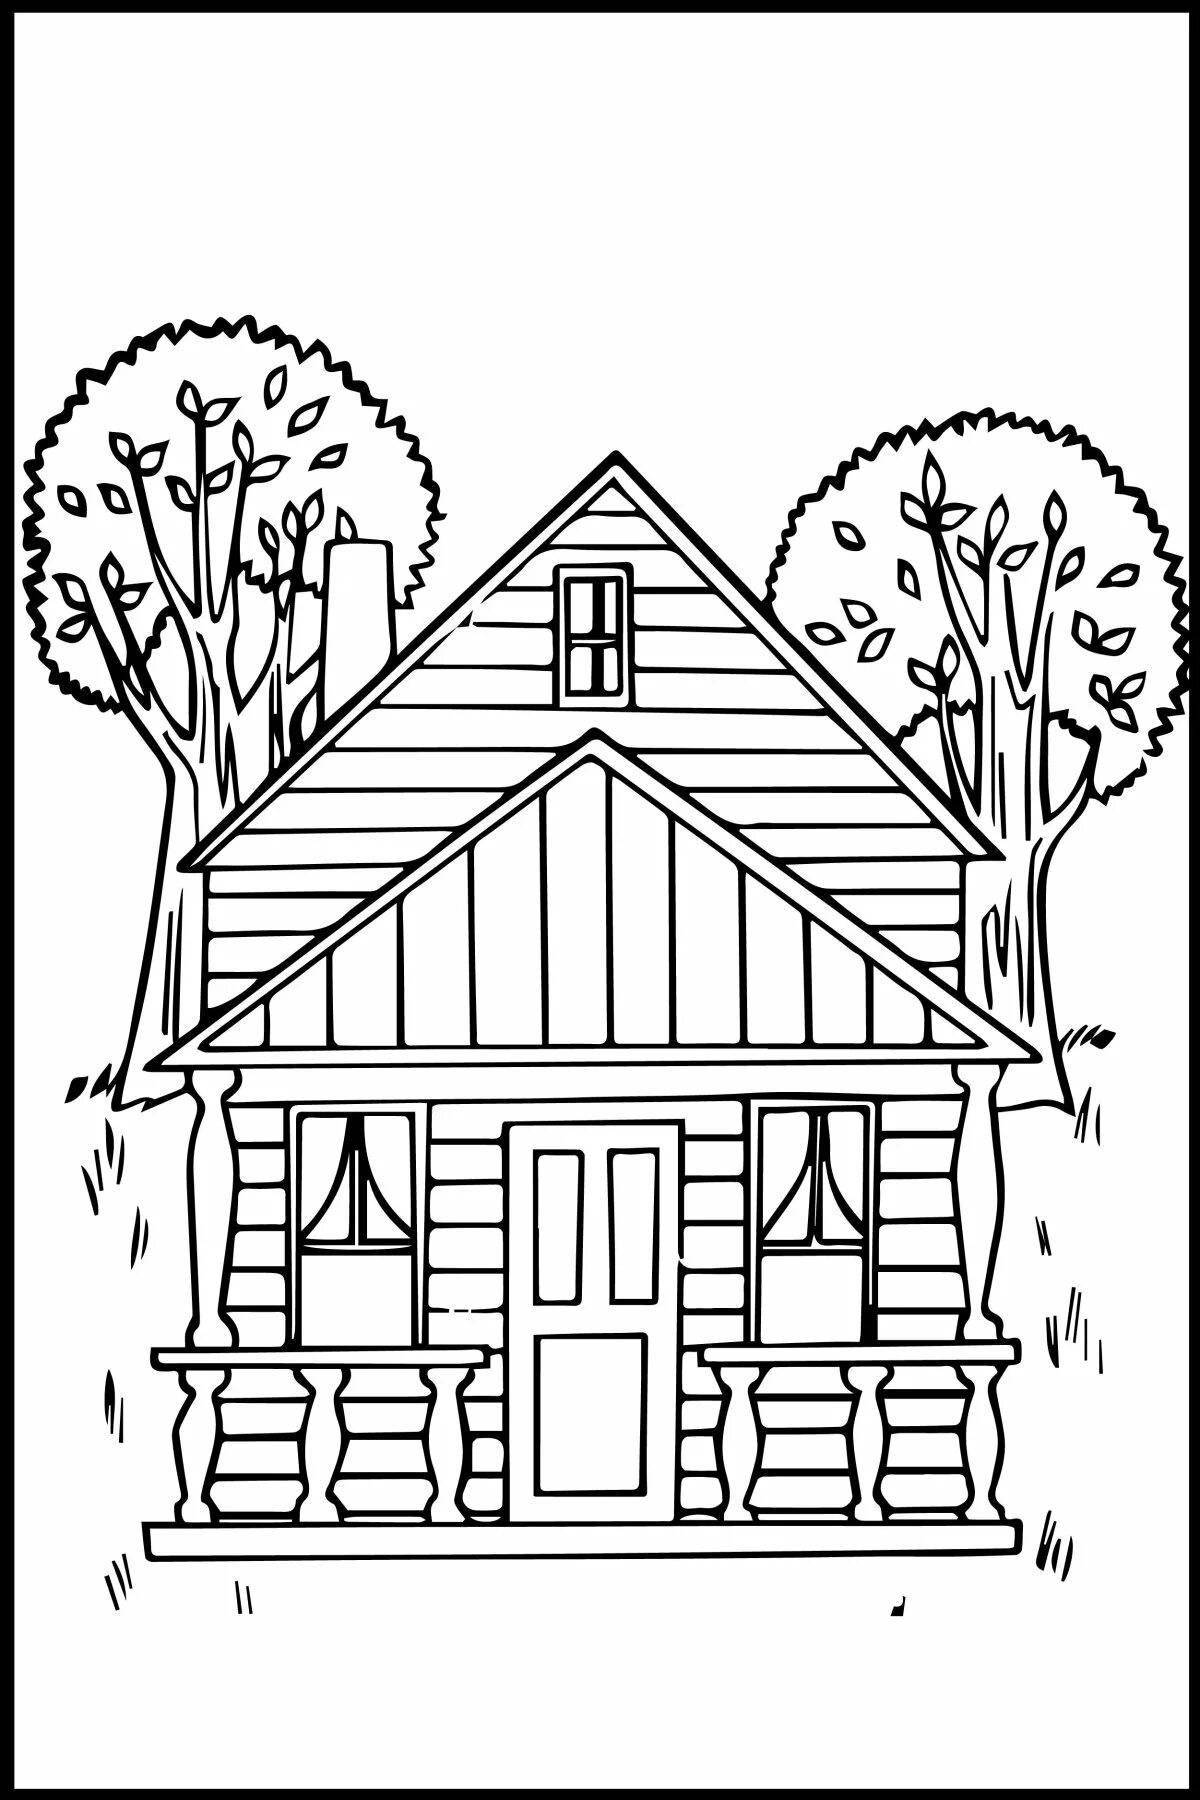 Cute wooden house coloring for kids